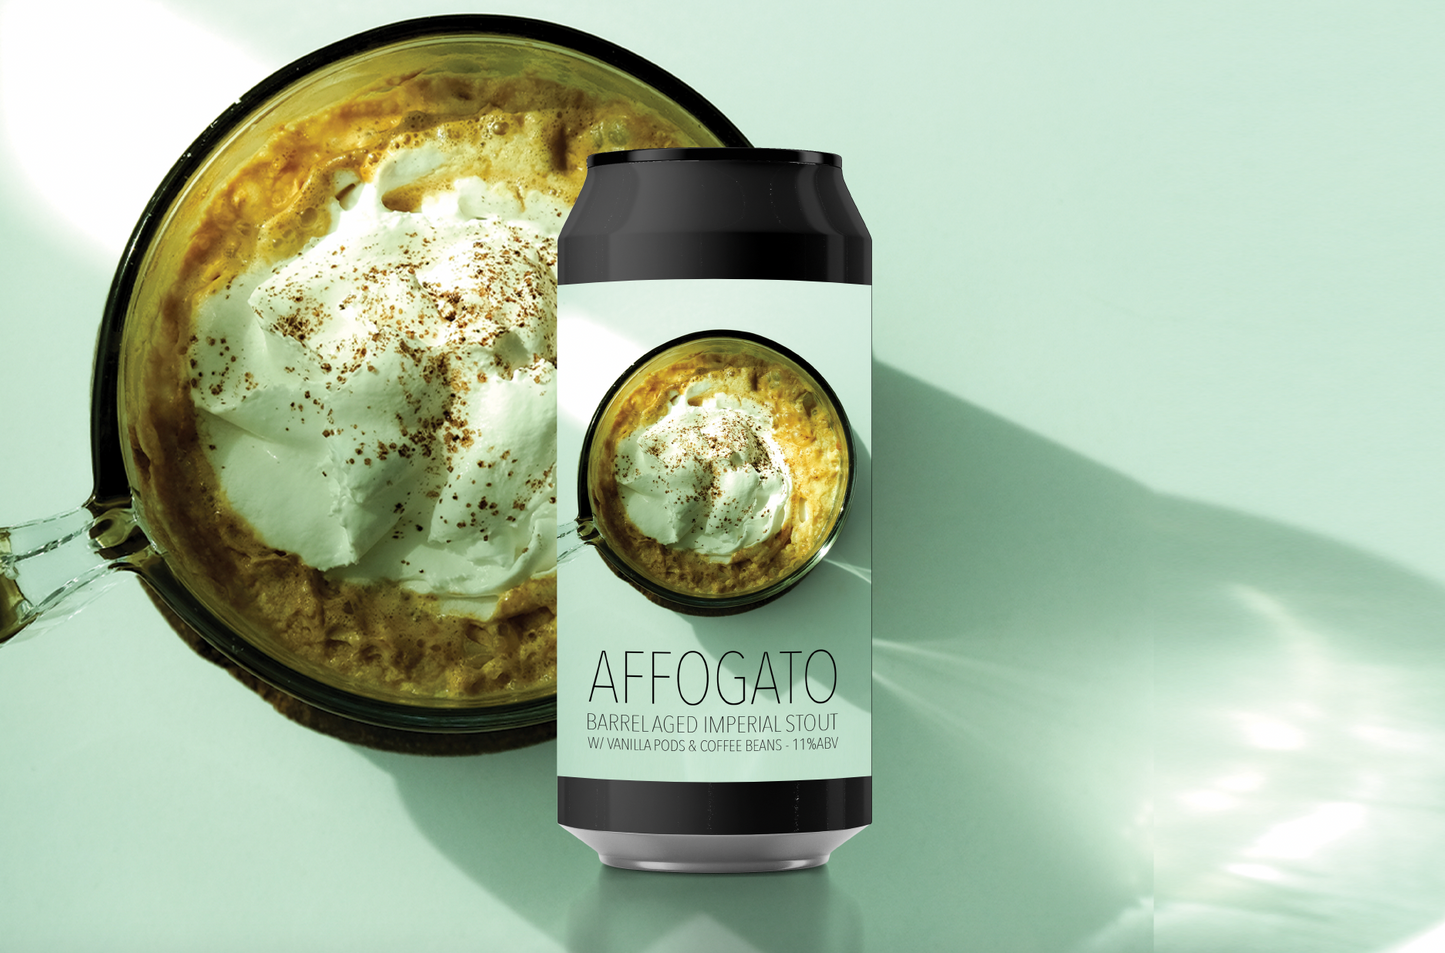 AFFOGATO - BA IMPERIAL STOUT W/ COFFEE BEANS & VANILLA PODS 11%ABV